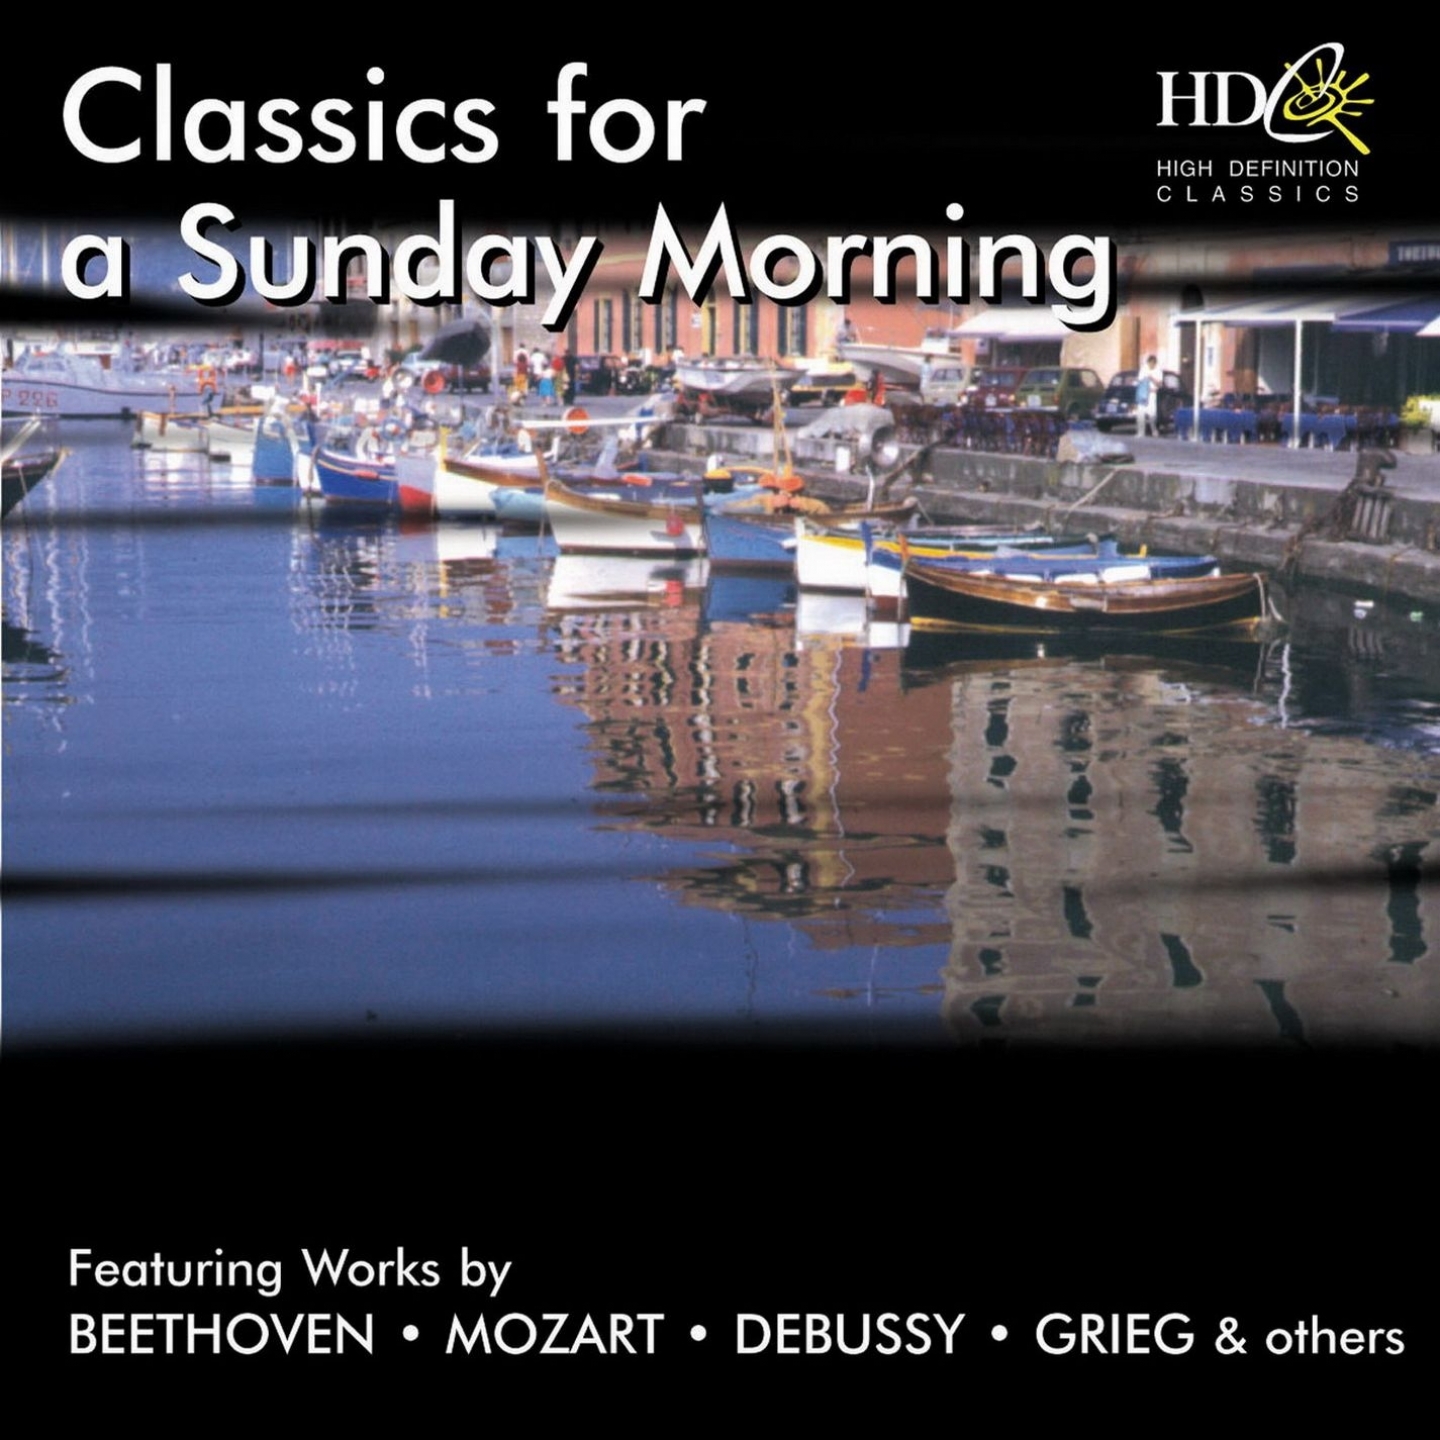 Classics for a Sunday Morning Featuring Works by Beethoven, Mozart, Debussy, Grieg and others